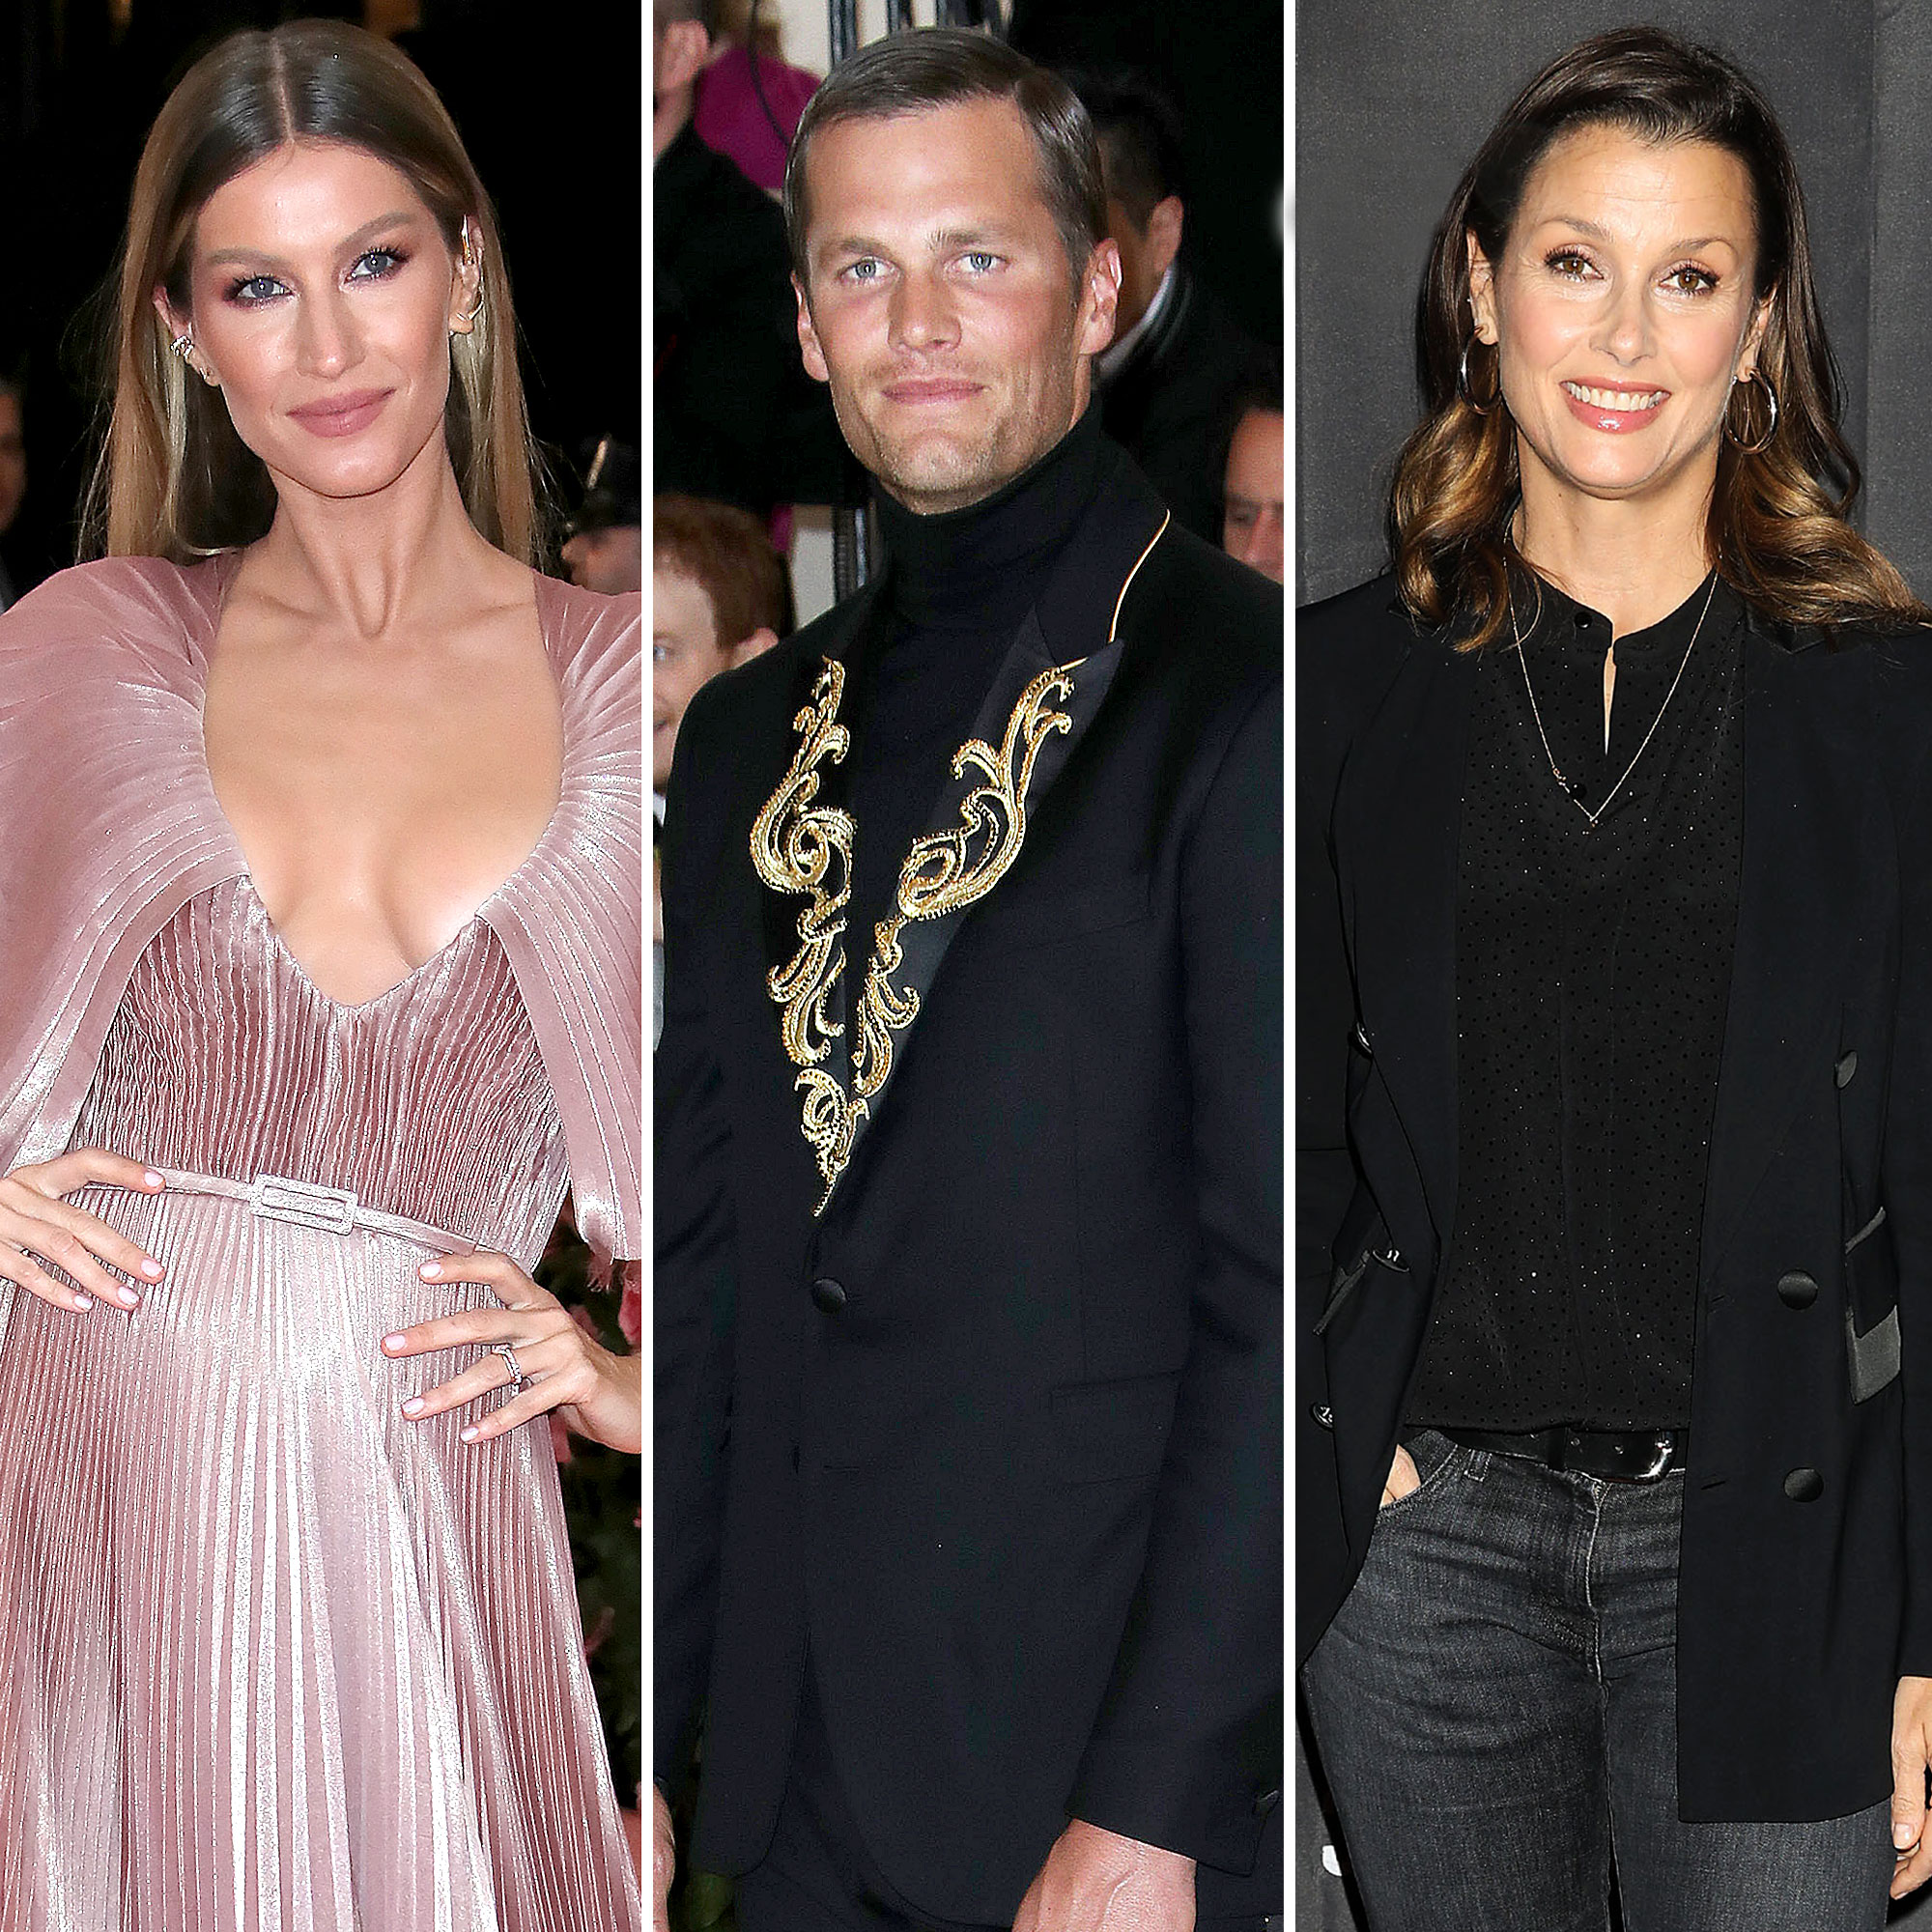 Gisele Bündchen on Her Relationship With Bridget Moynahan – SheKnows